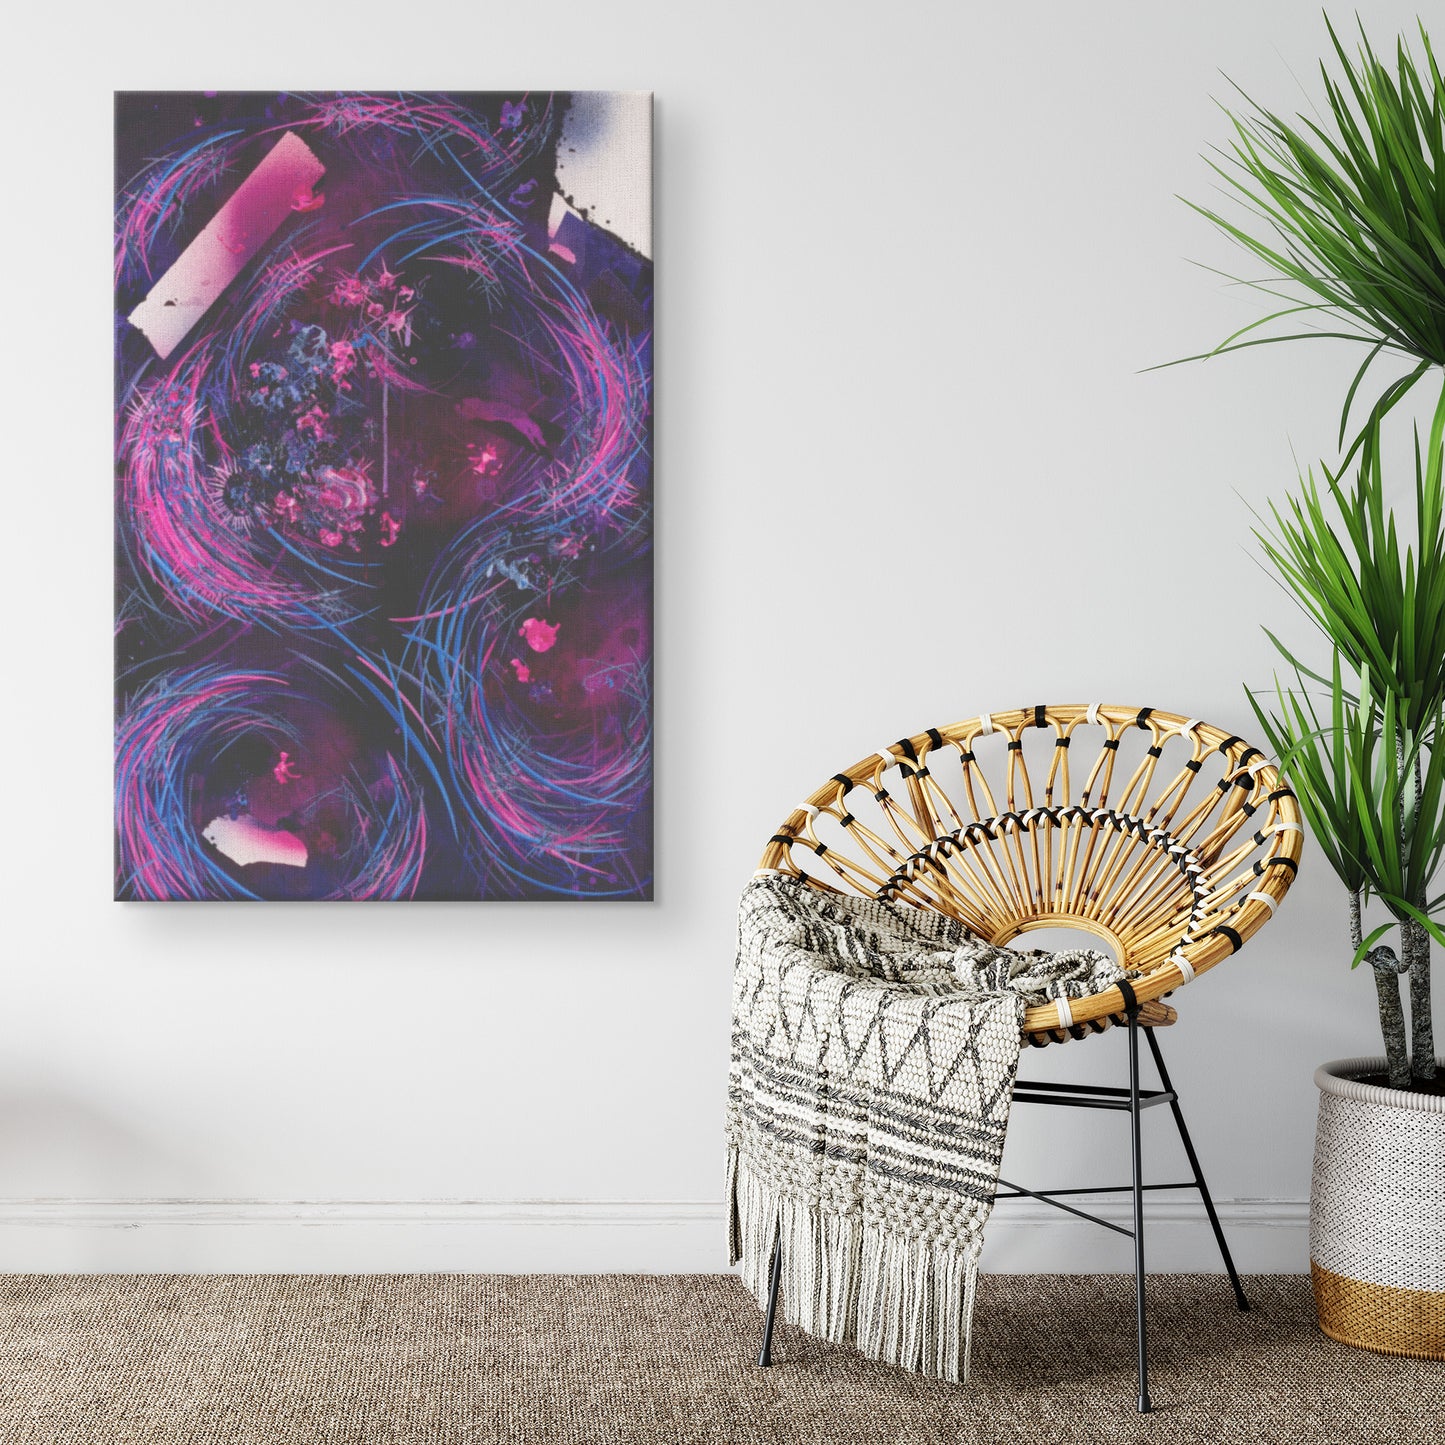 the best abstract art and decor by Michael Carini